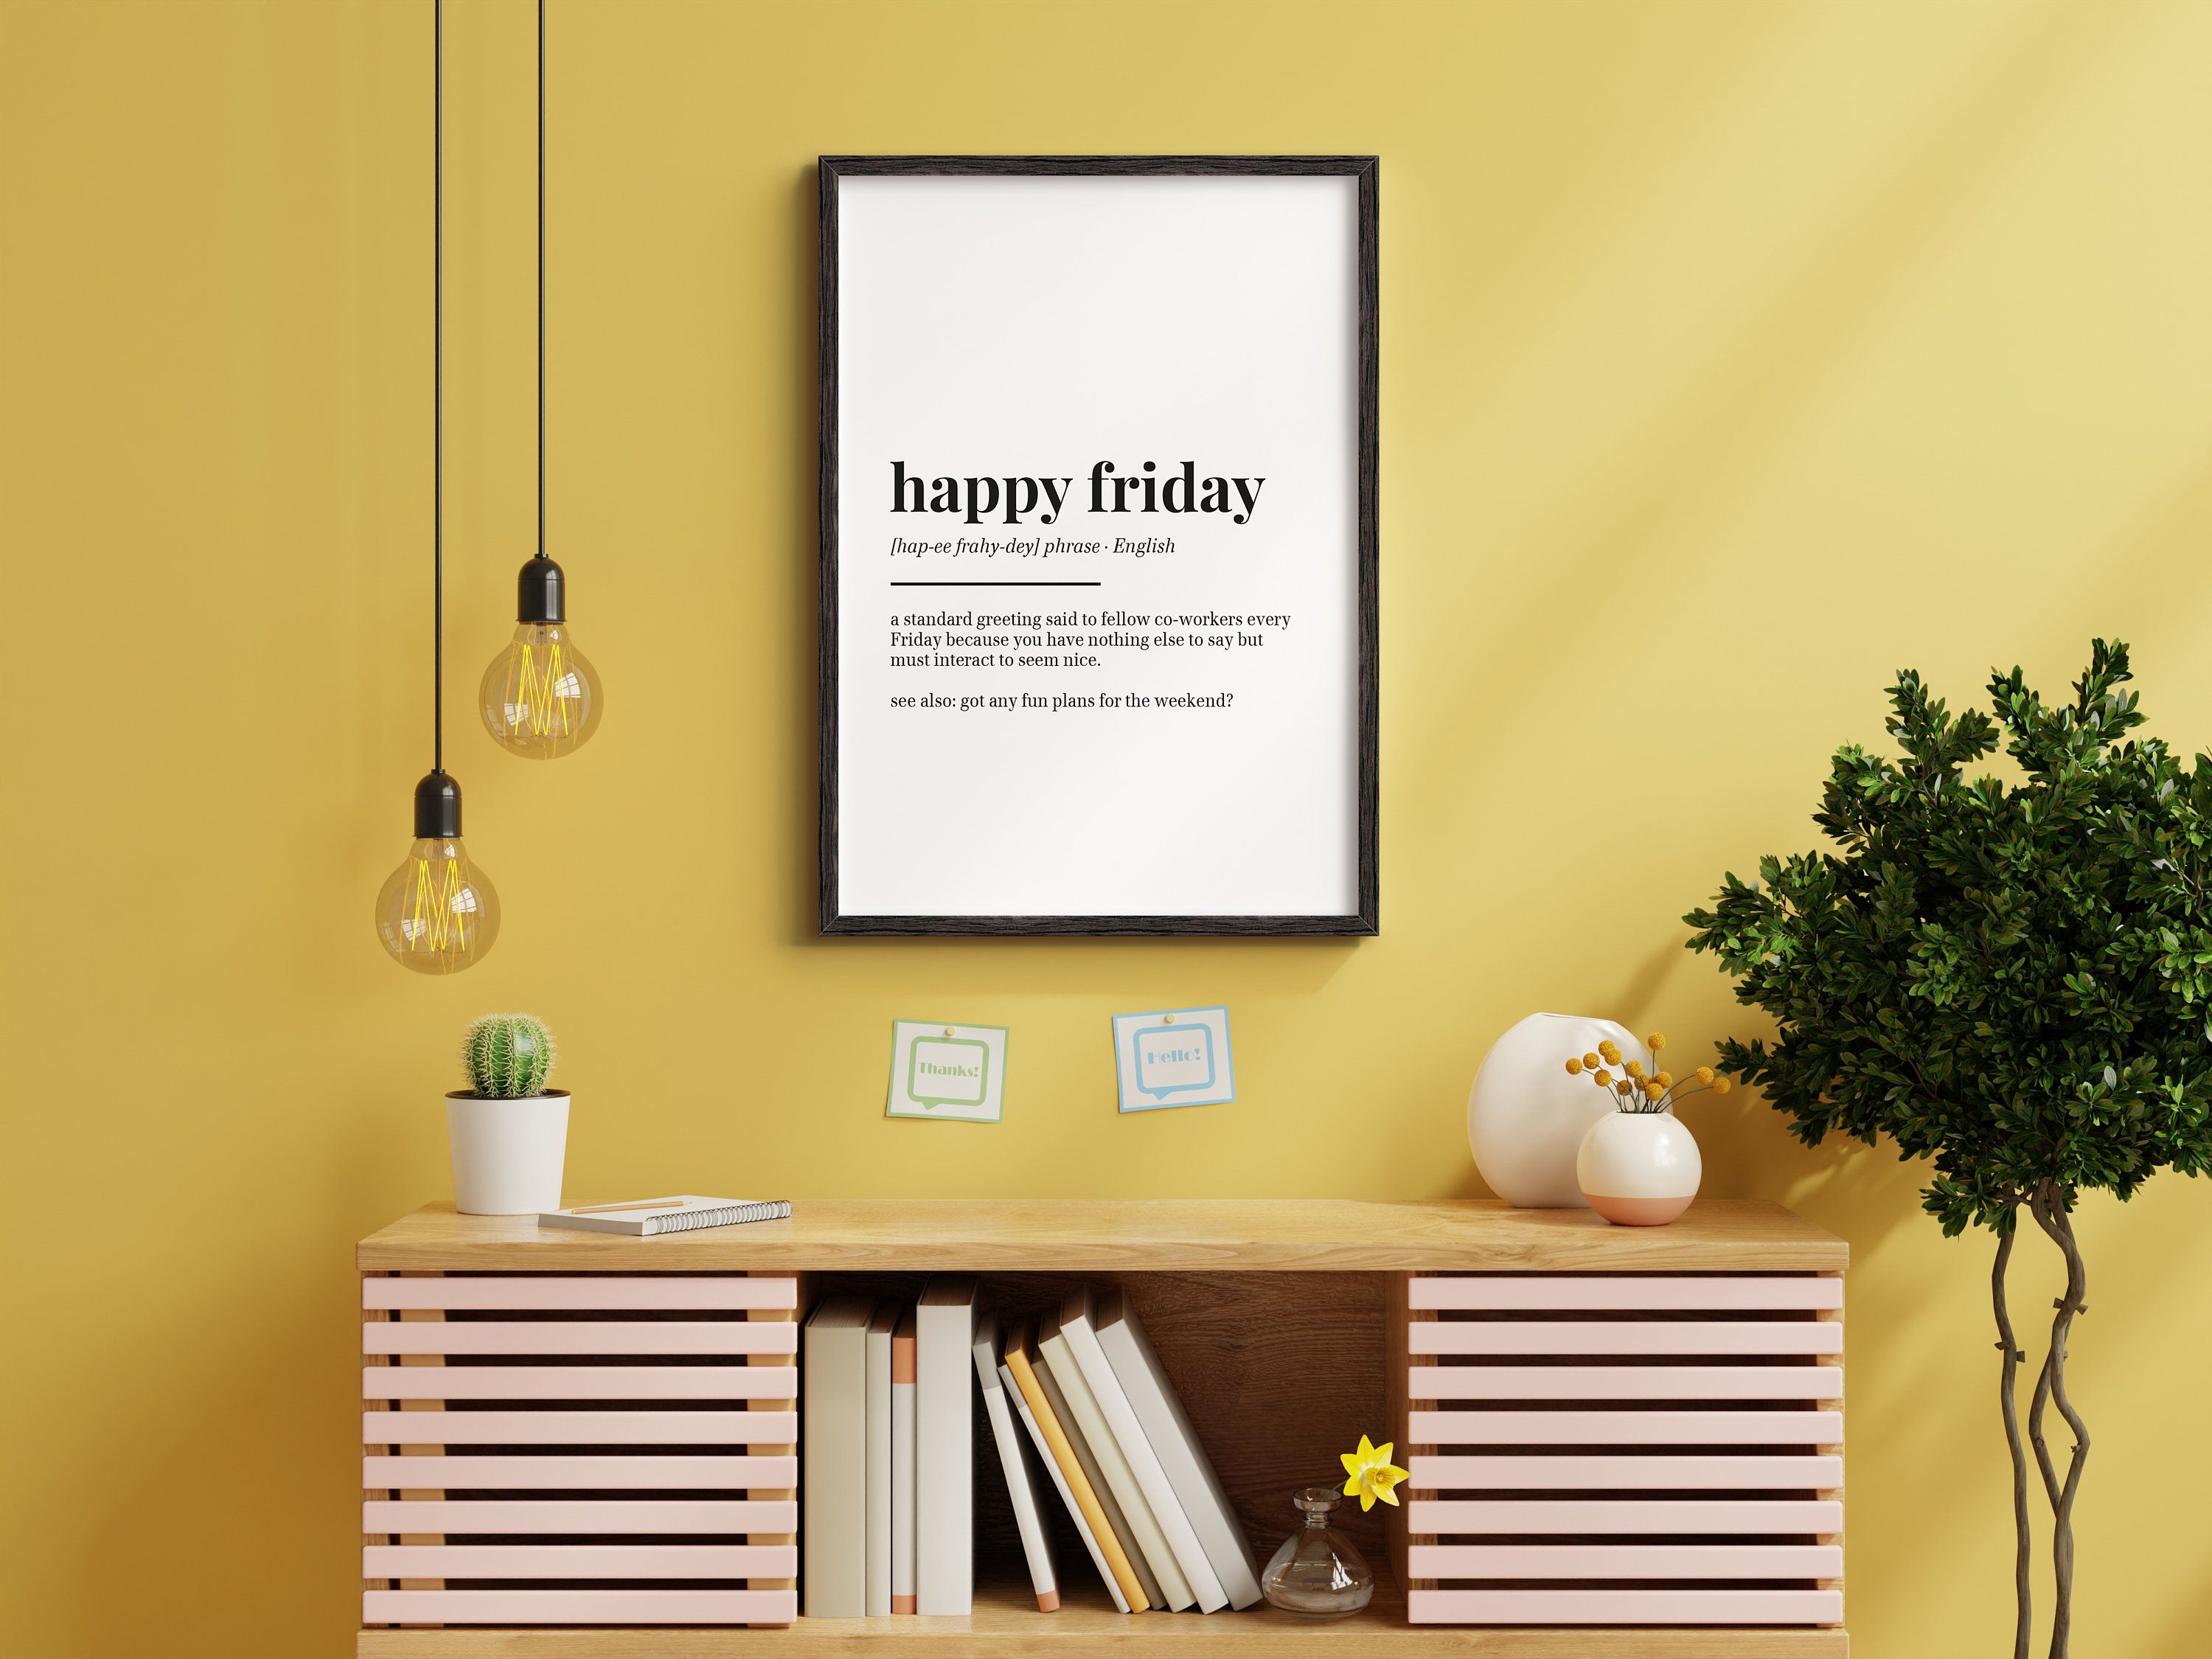 Happy Print Wall 12x14 10x12, 5x7, 8x10, A4, Poster Home - Art Etsy Funny Friday Decor Definition A6, 4x6, A3, Office A5,